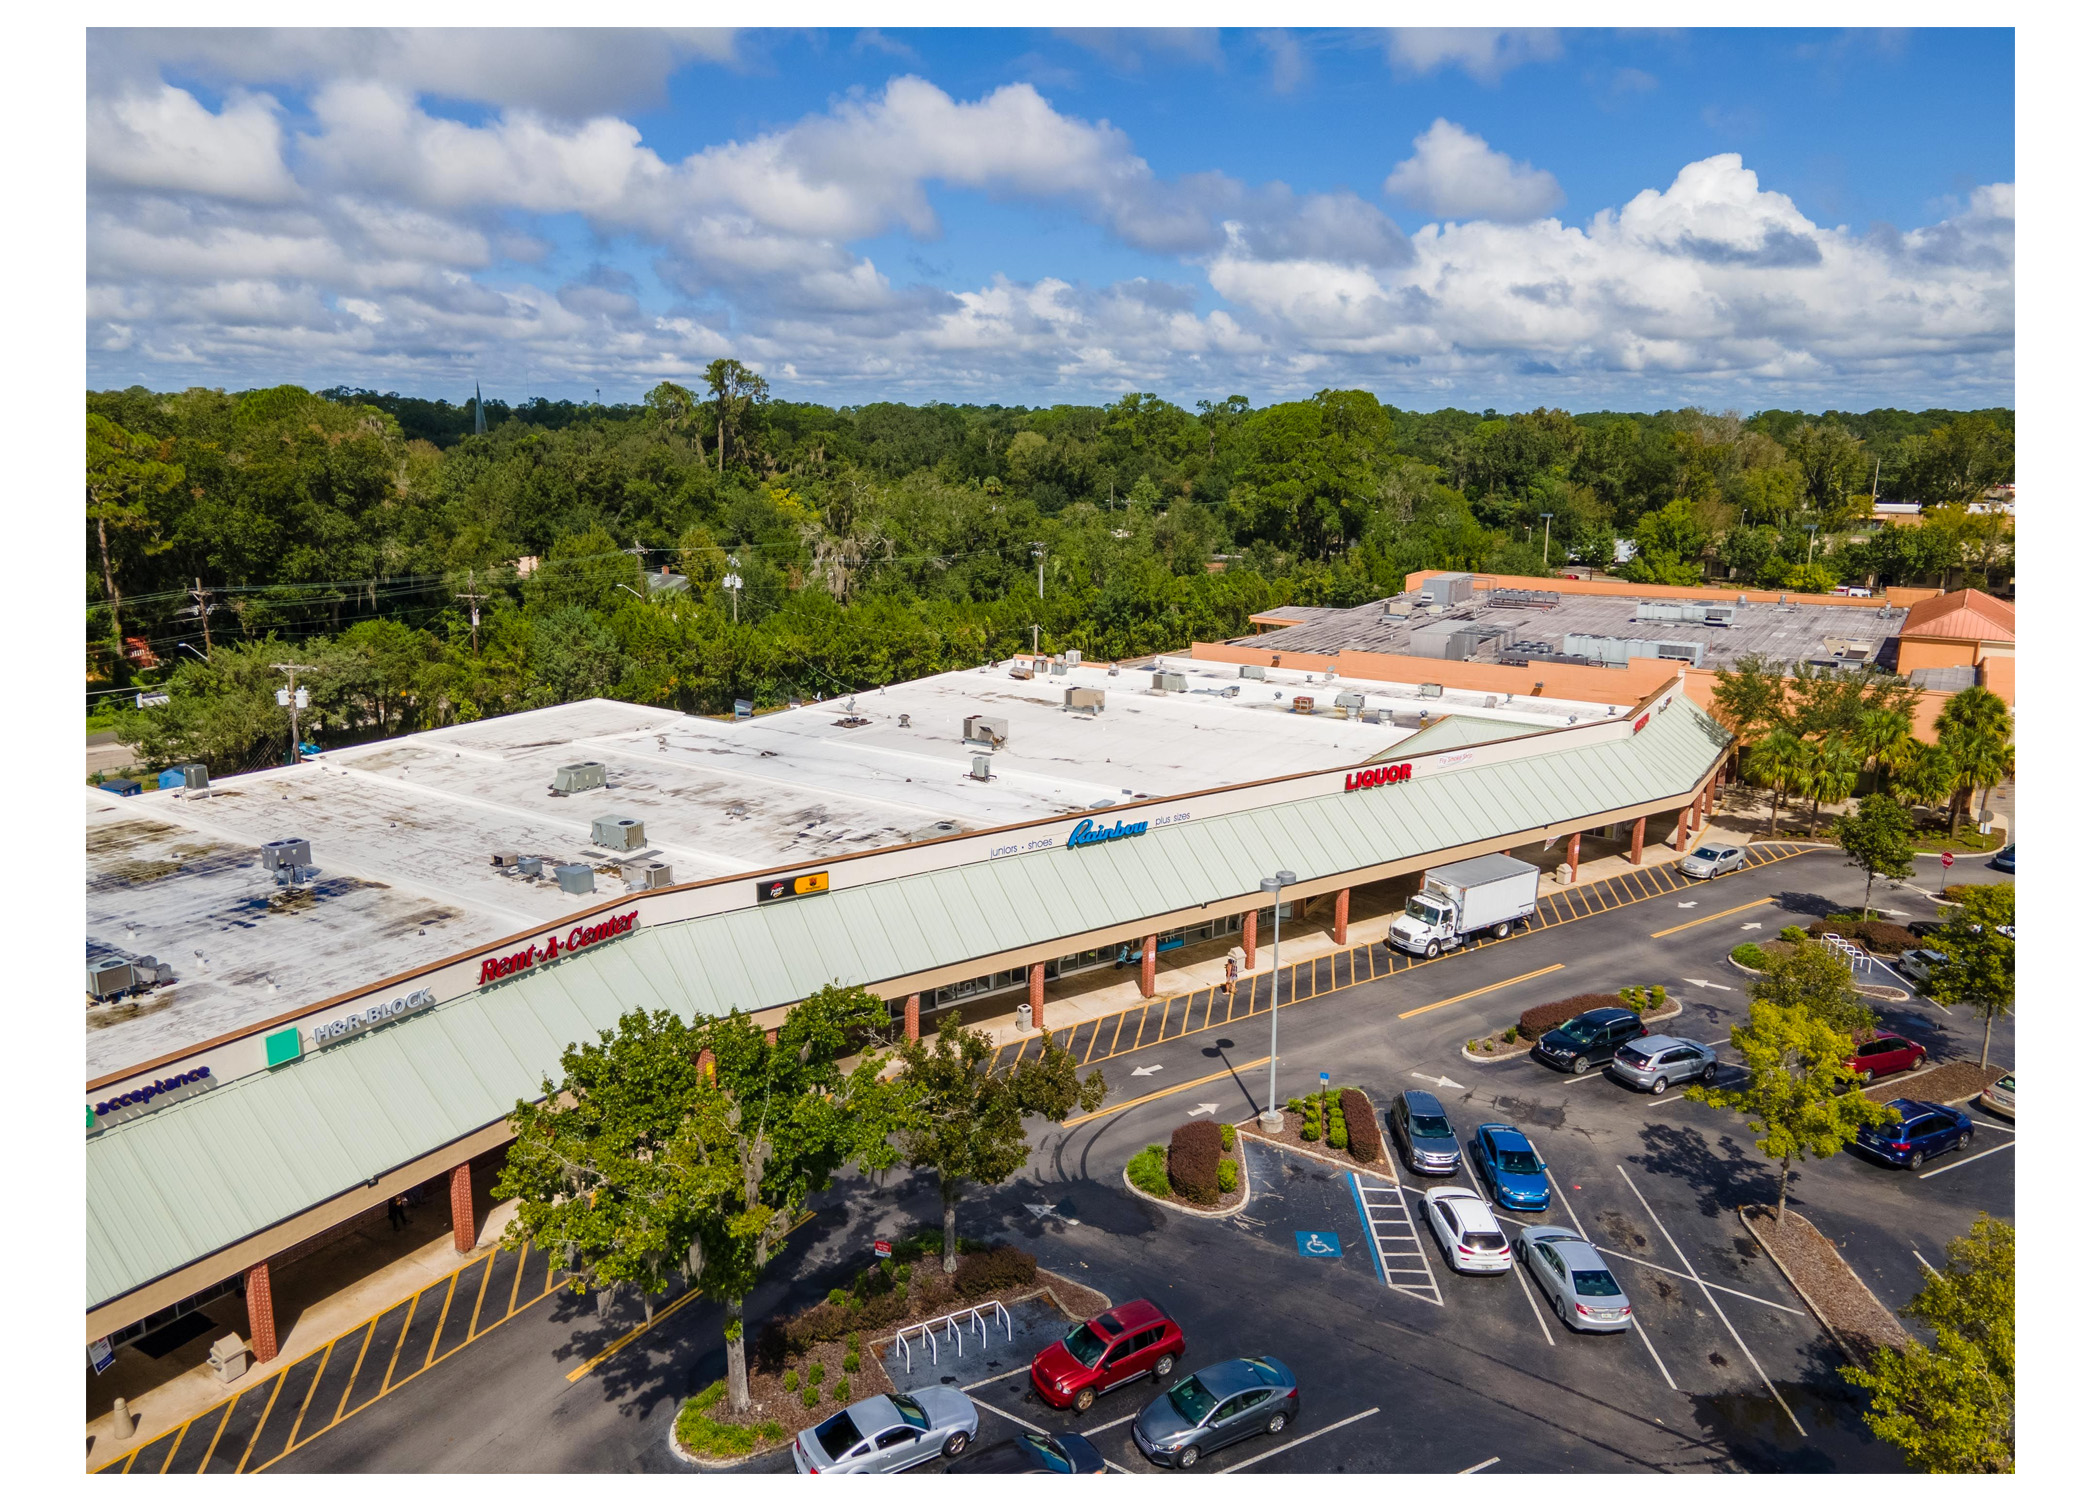 Gainesville Shopping Center, H&R Block, Rent A Center, Pizza Hut, Rainbow, Liquor and parking lot aerial view.